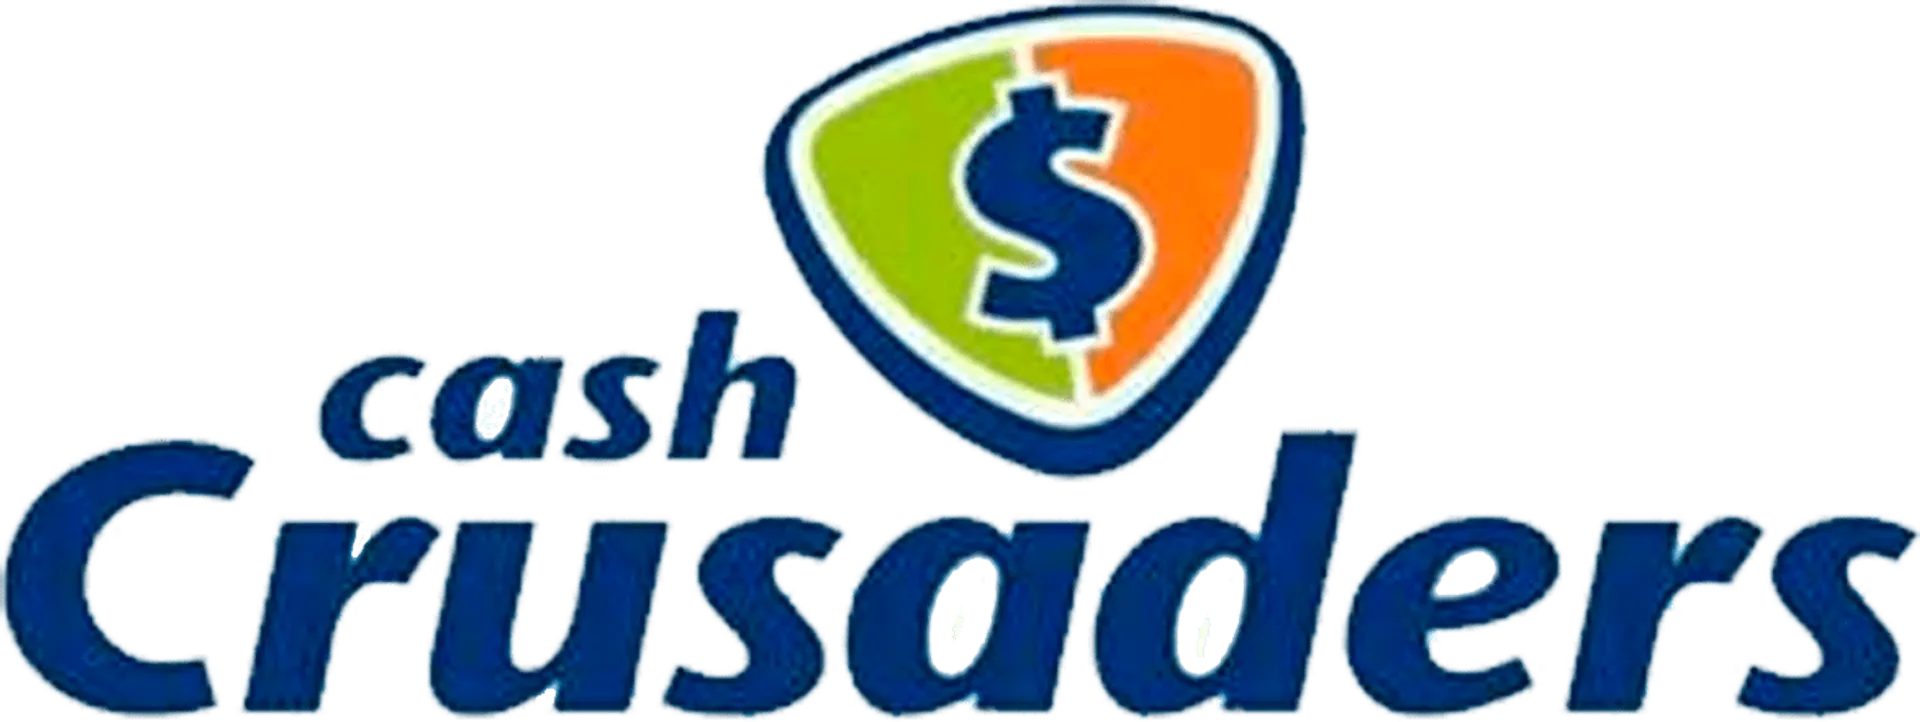 CASH CRUSADERS logo. Current weekly ad